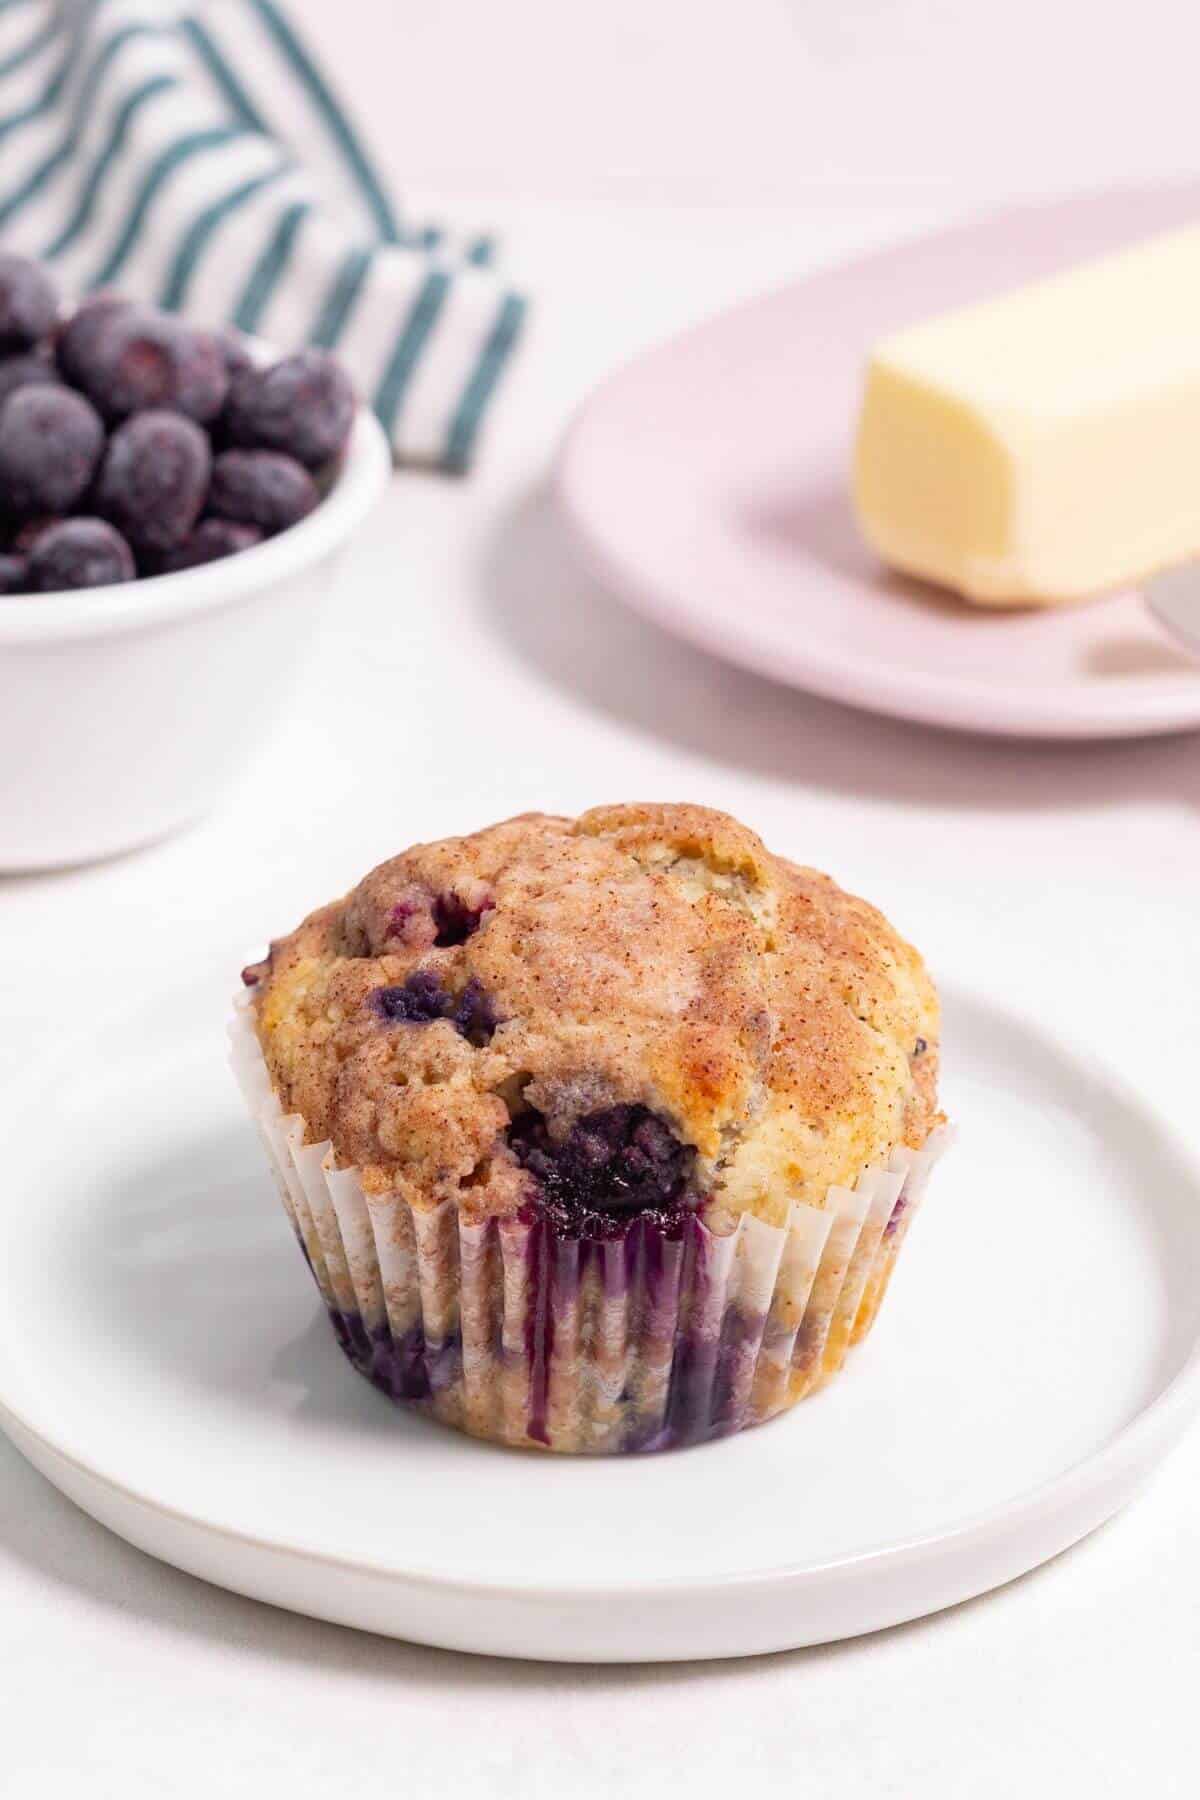 Blueberry muffin on plate with blueberries and butter.